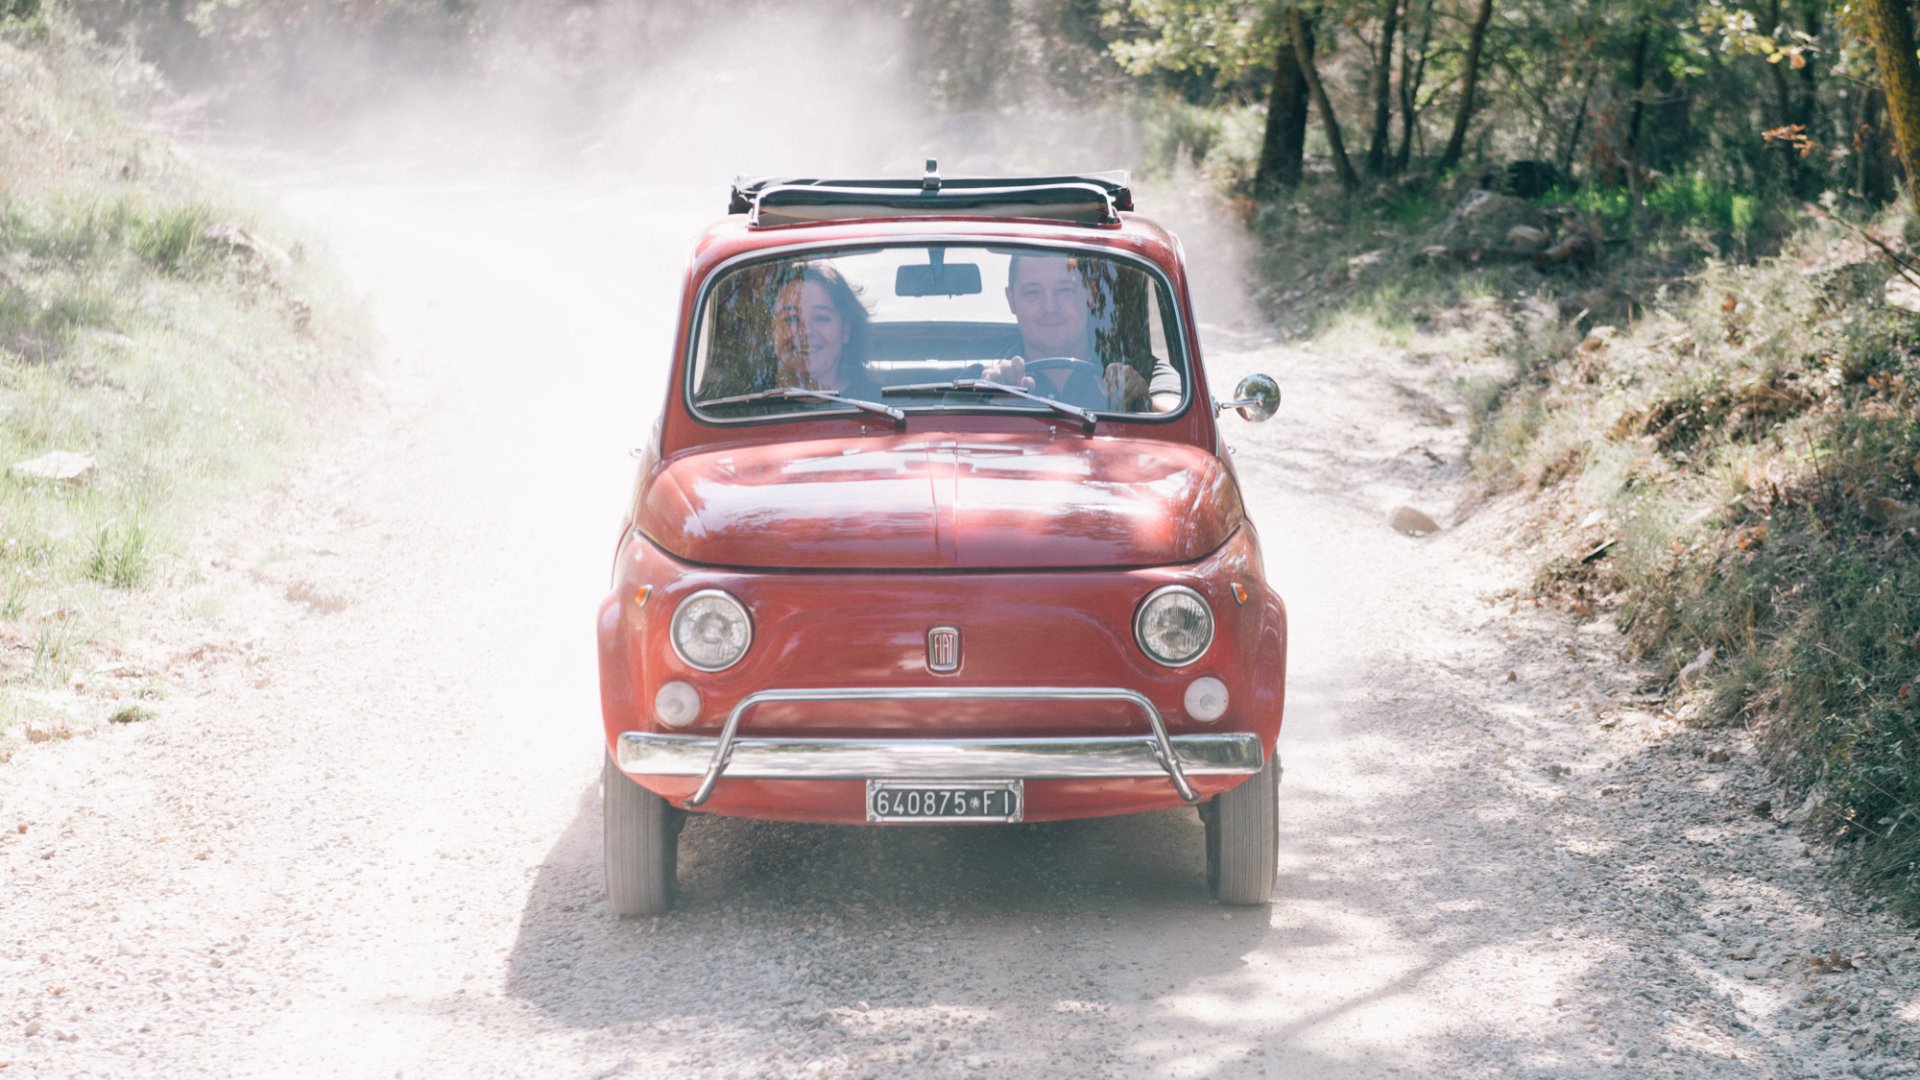 Tour on the road with the iconic car to discover this part of Tuscany with a wine tasting experience in an organic farm